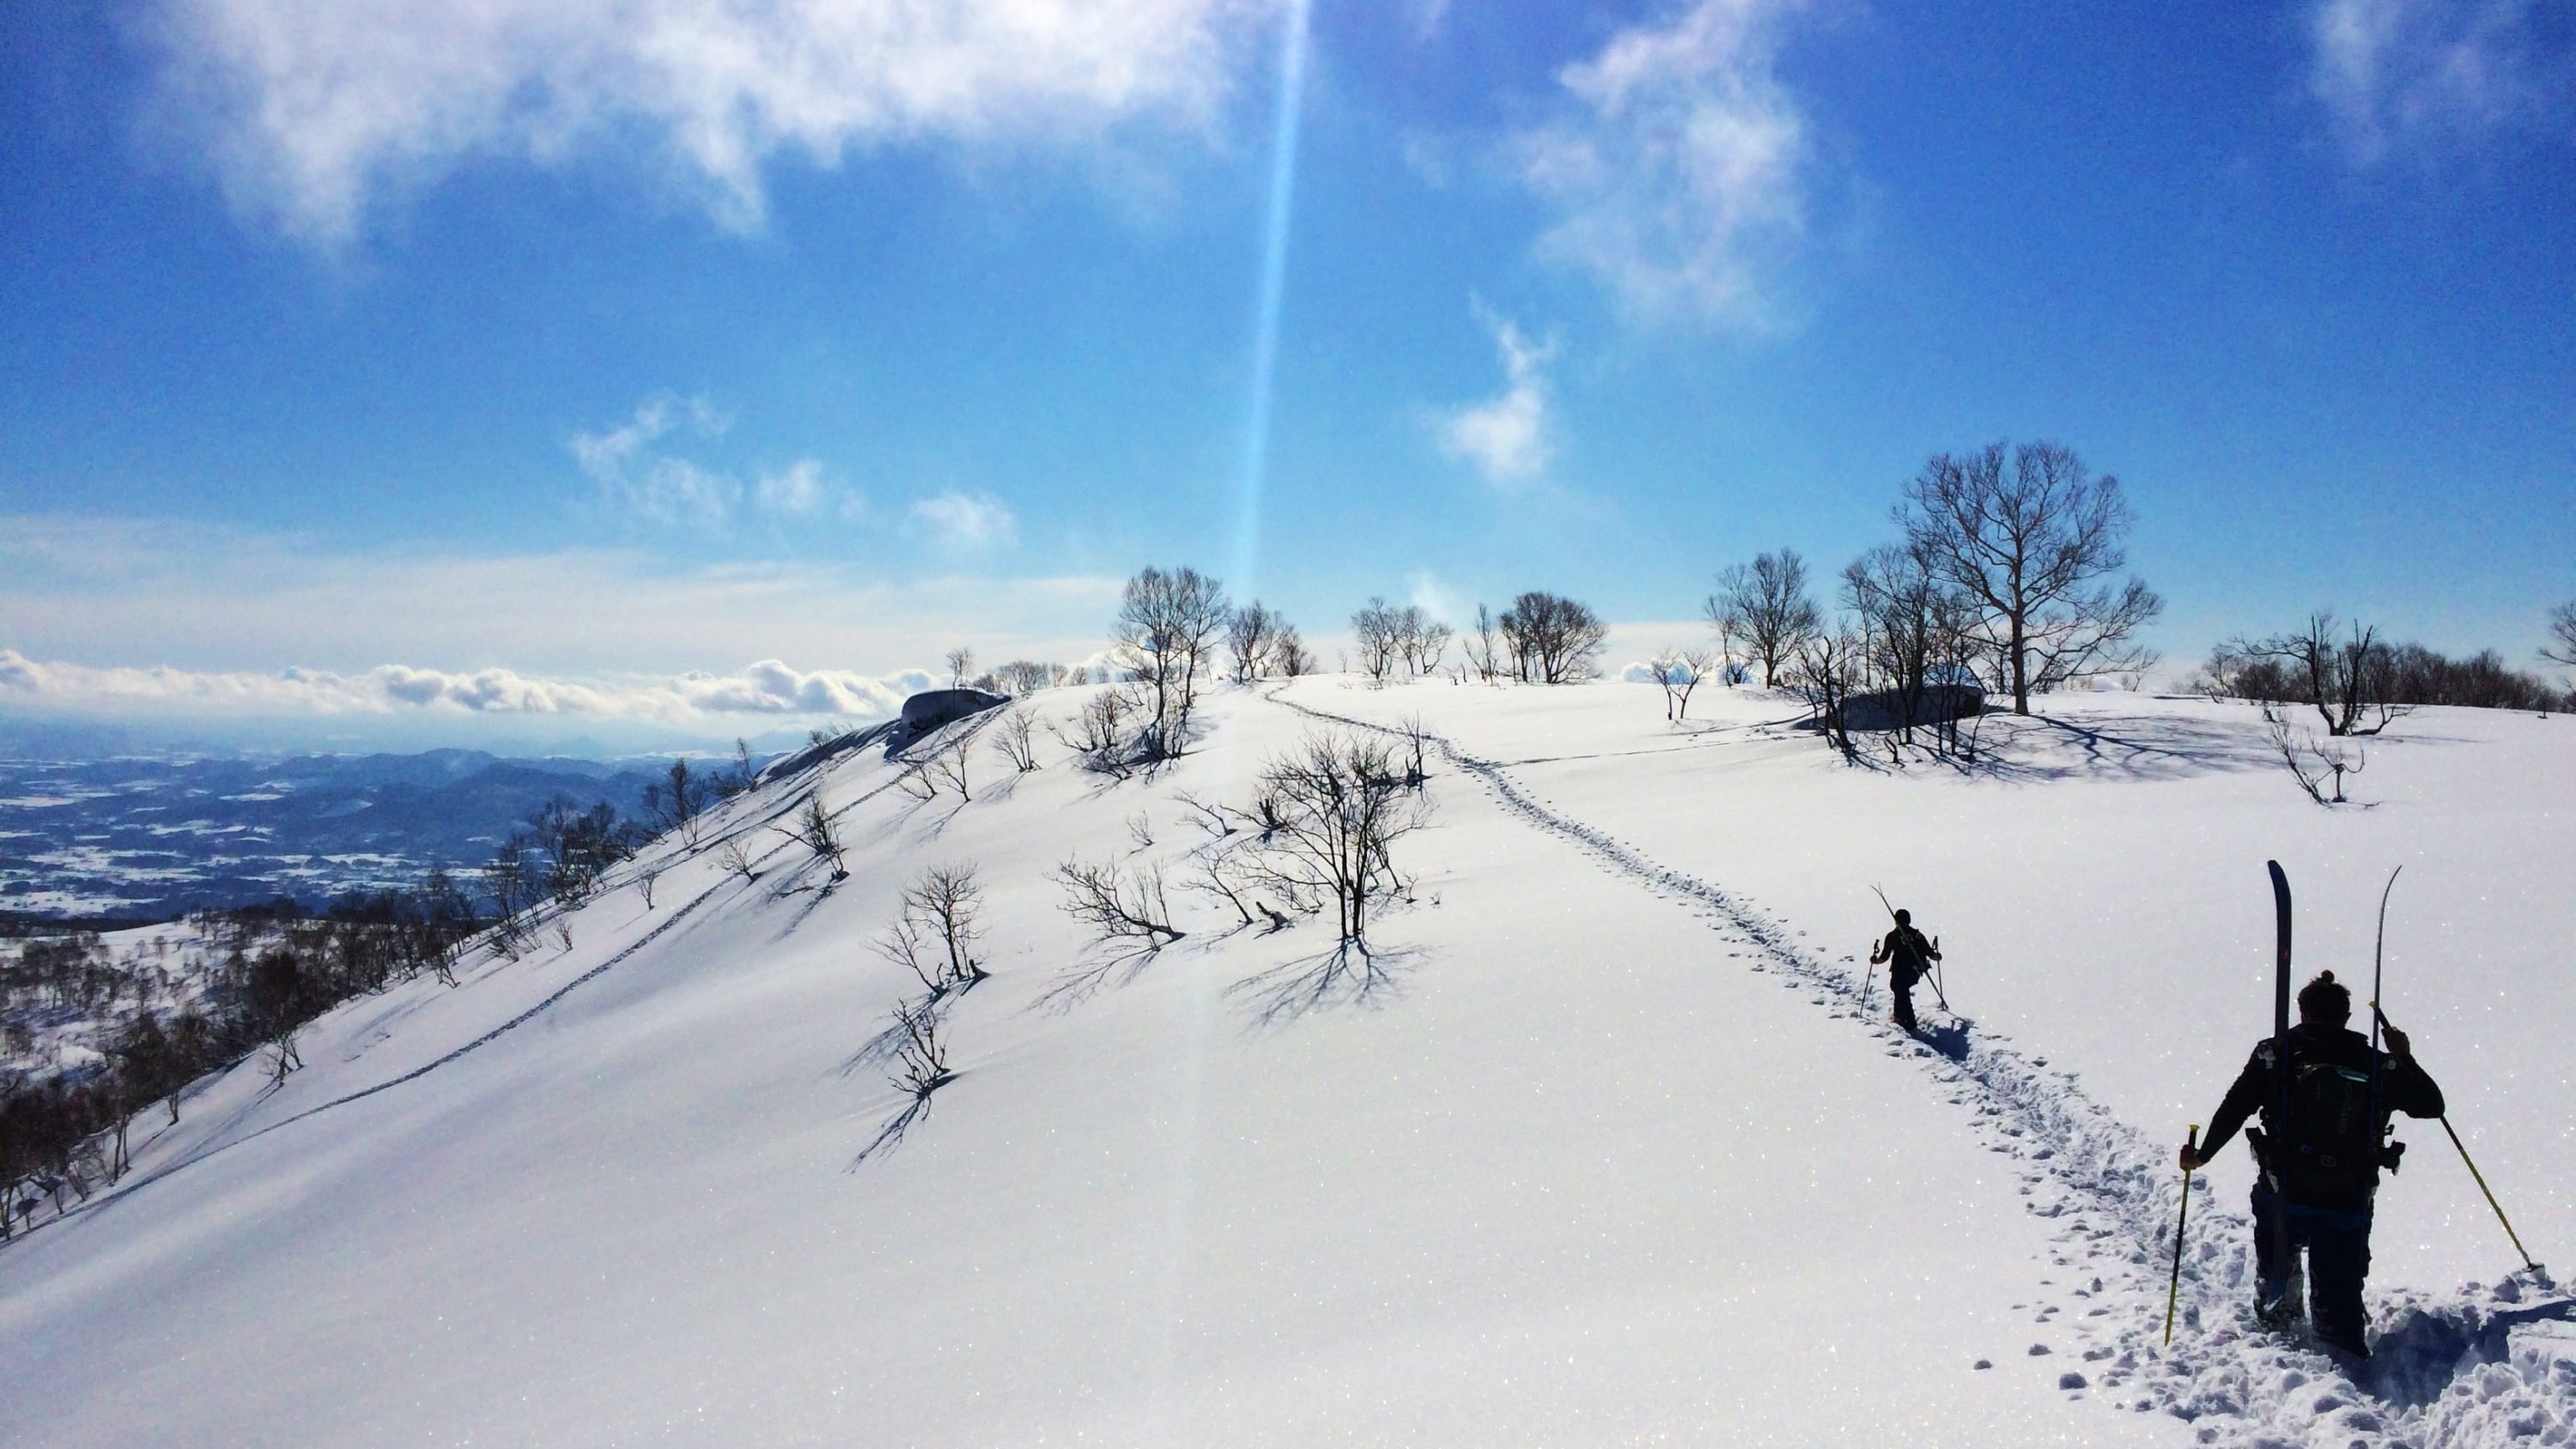 Niseko is the most popular Japan Ski Resort offering the best skiing in Japan. At Niseko you can experience the best japan snow! Learn more about this Hokkaido Ski resort, from what to expect of the Japan powder to how to go from Sapporo to Niseko. #japan #travel #japow #ski